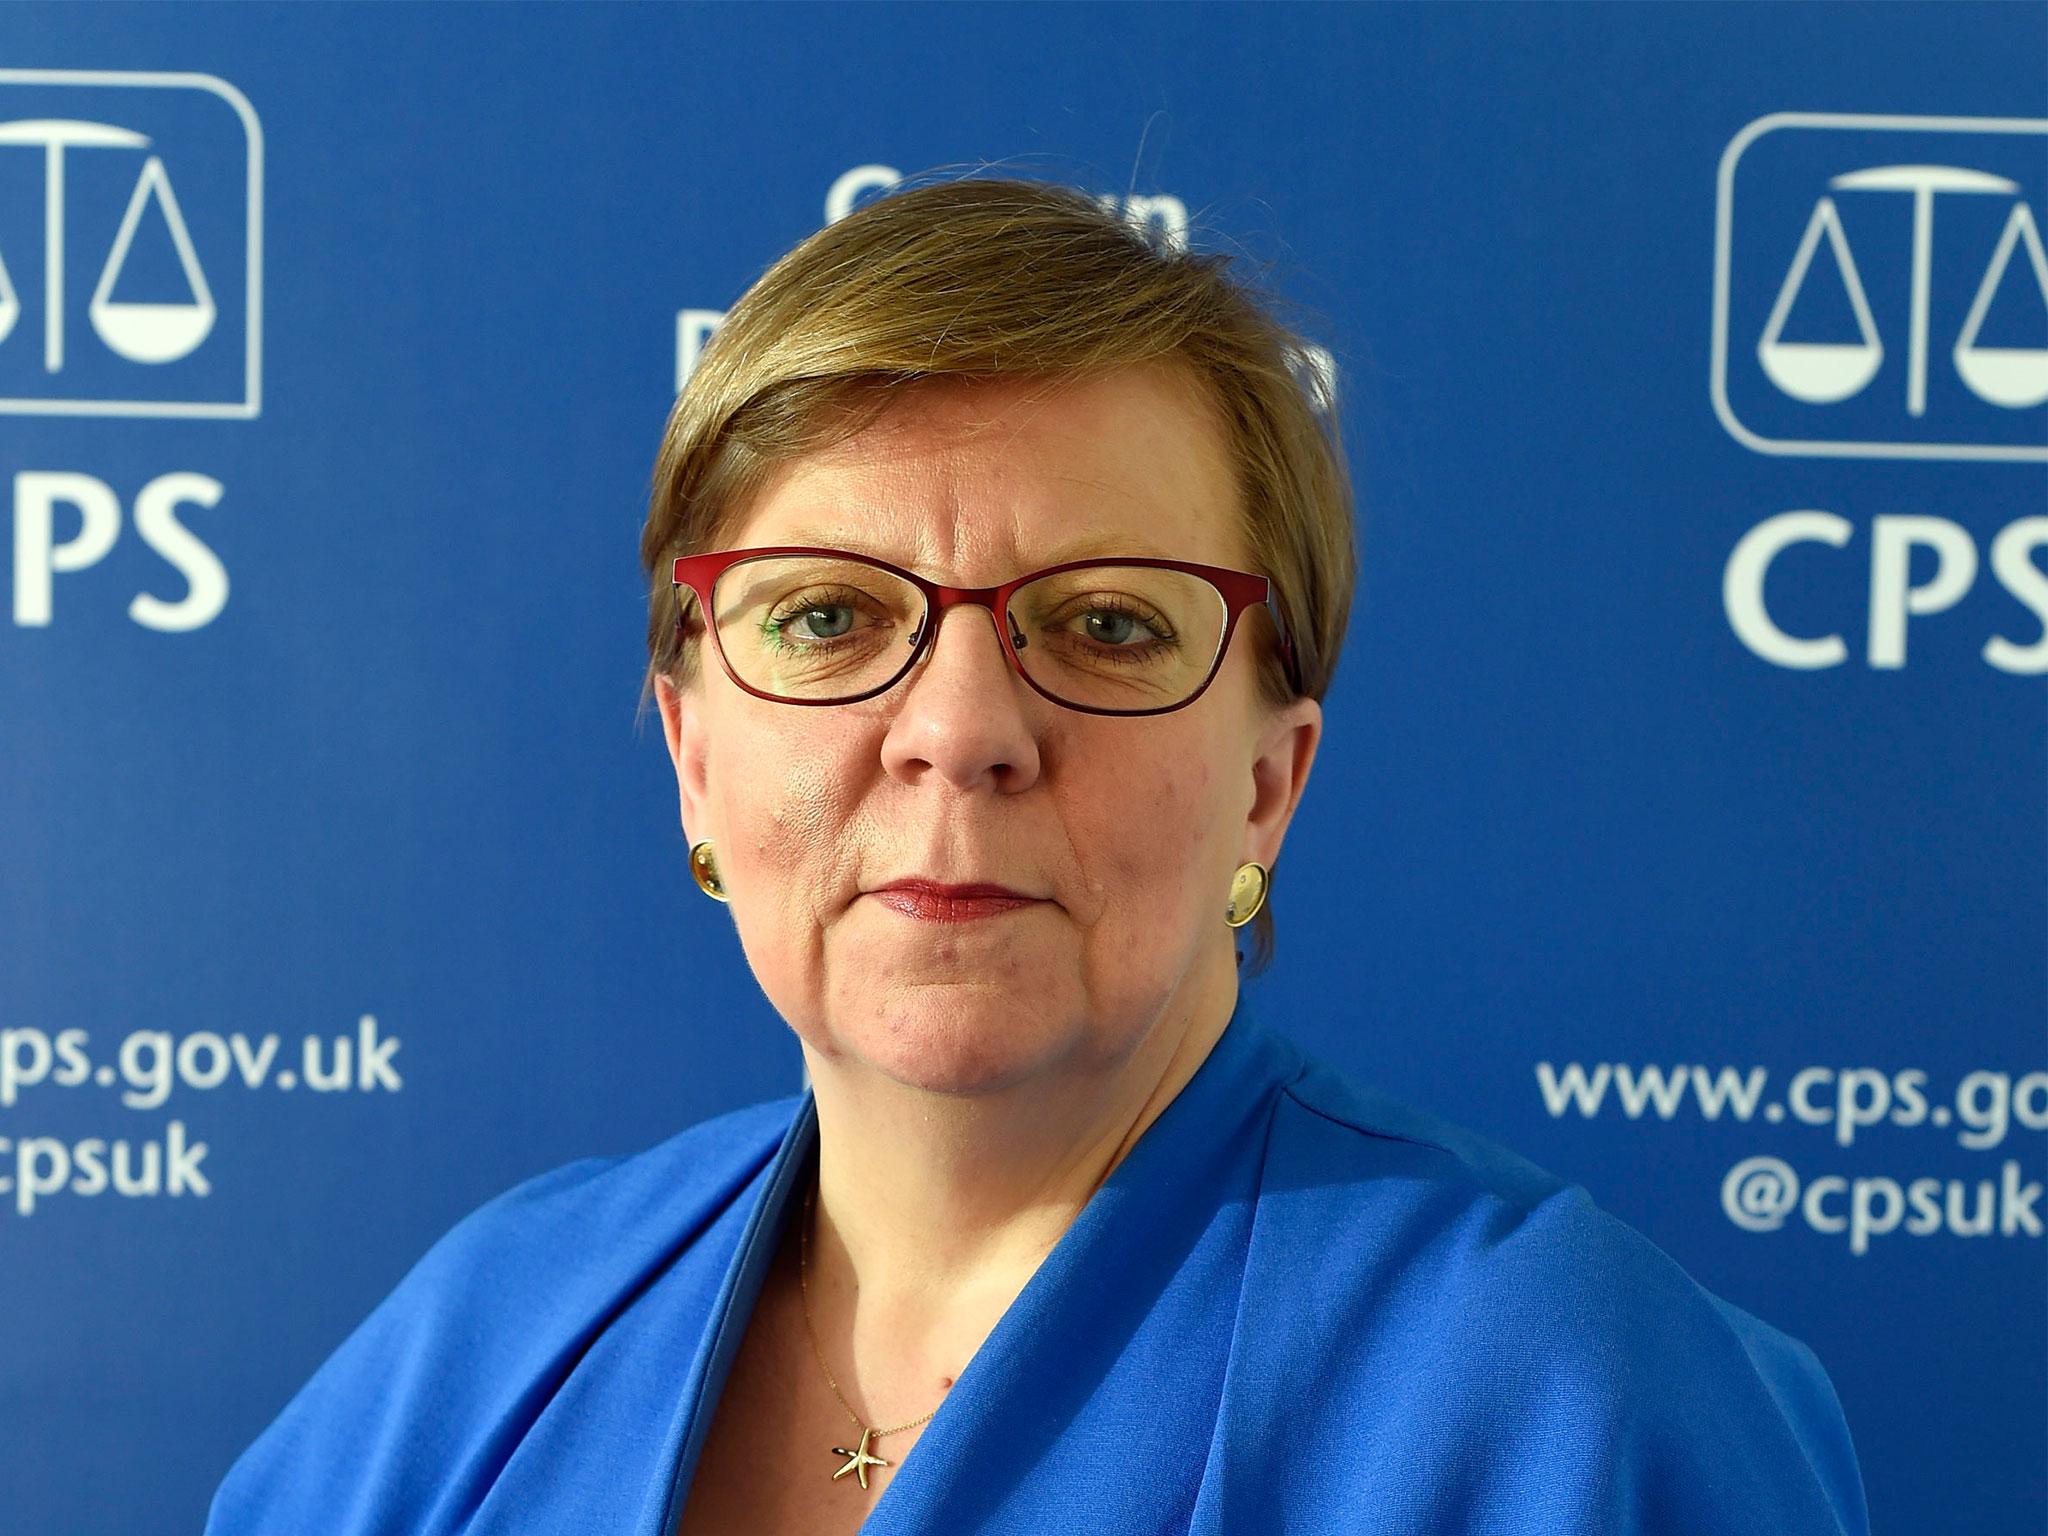 Alison Saunders, the Director of Prosecutions, claimed the 'system works'